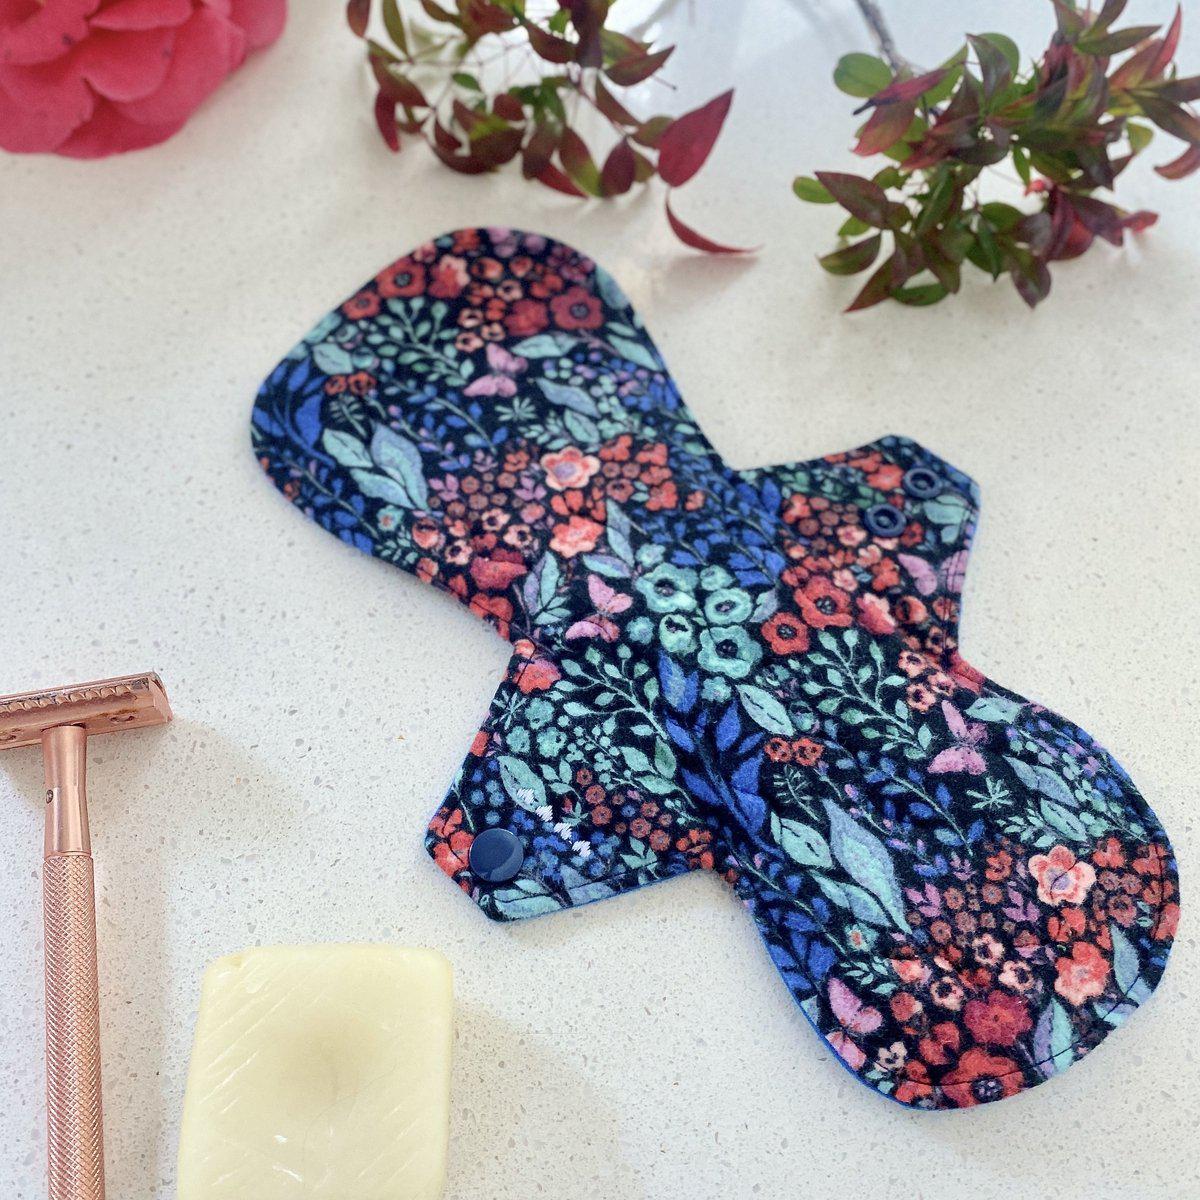 Heavy Flow Cloth Pads